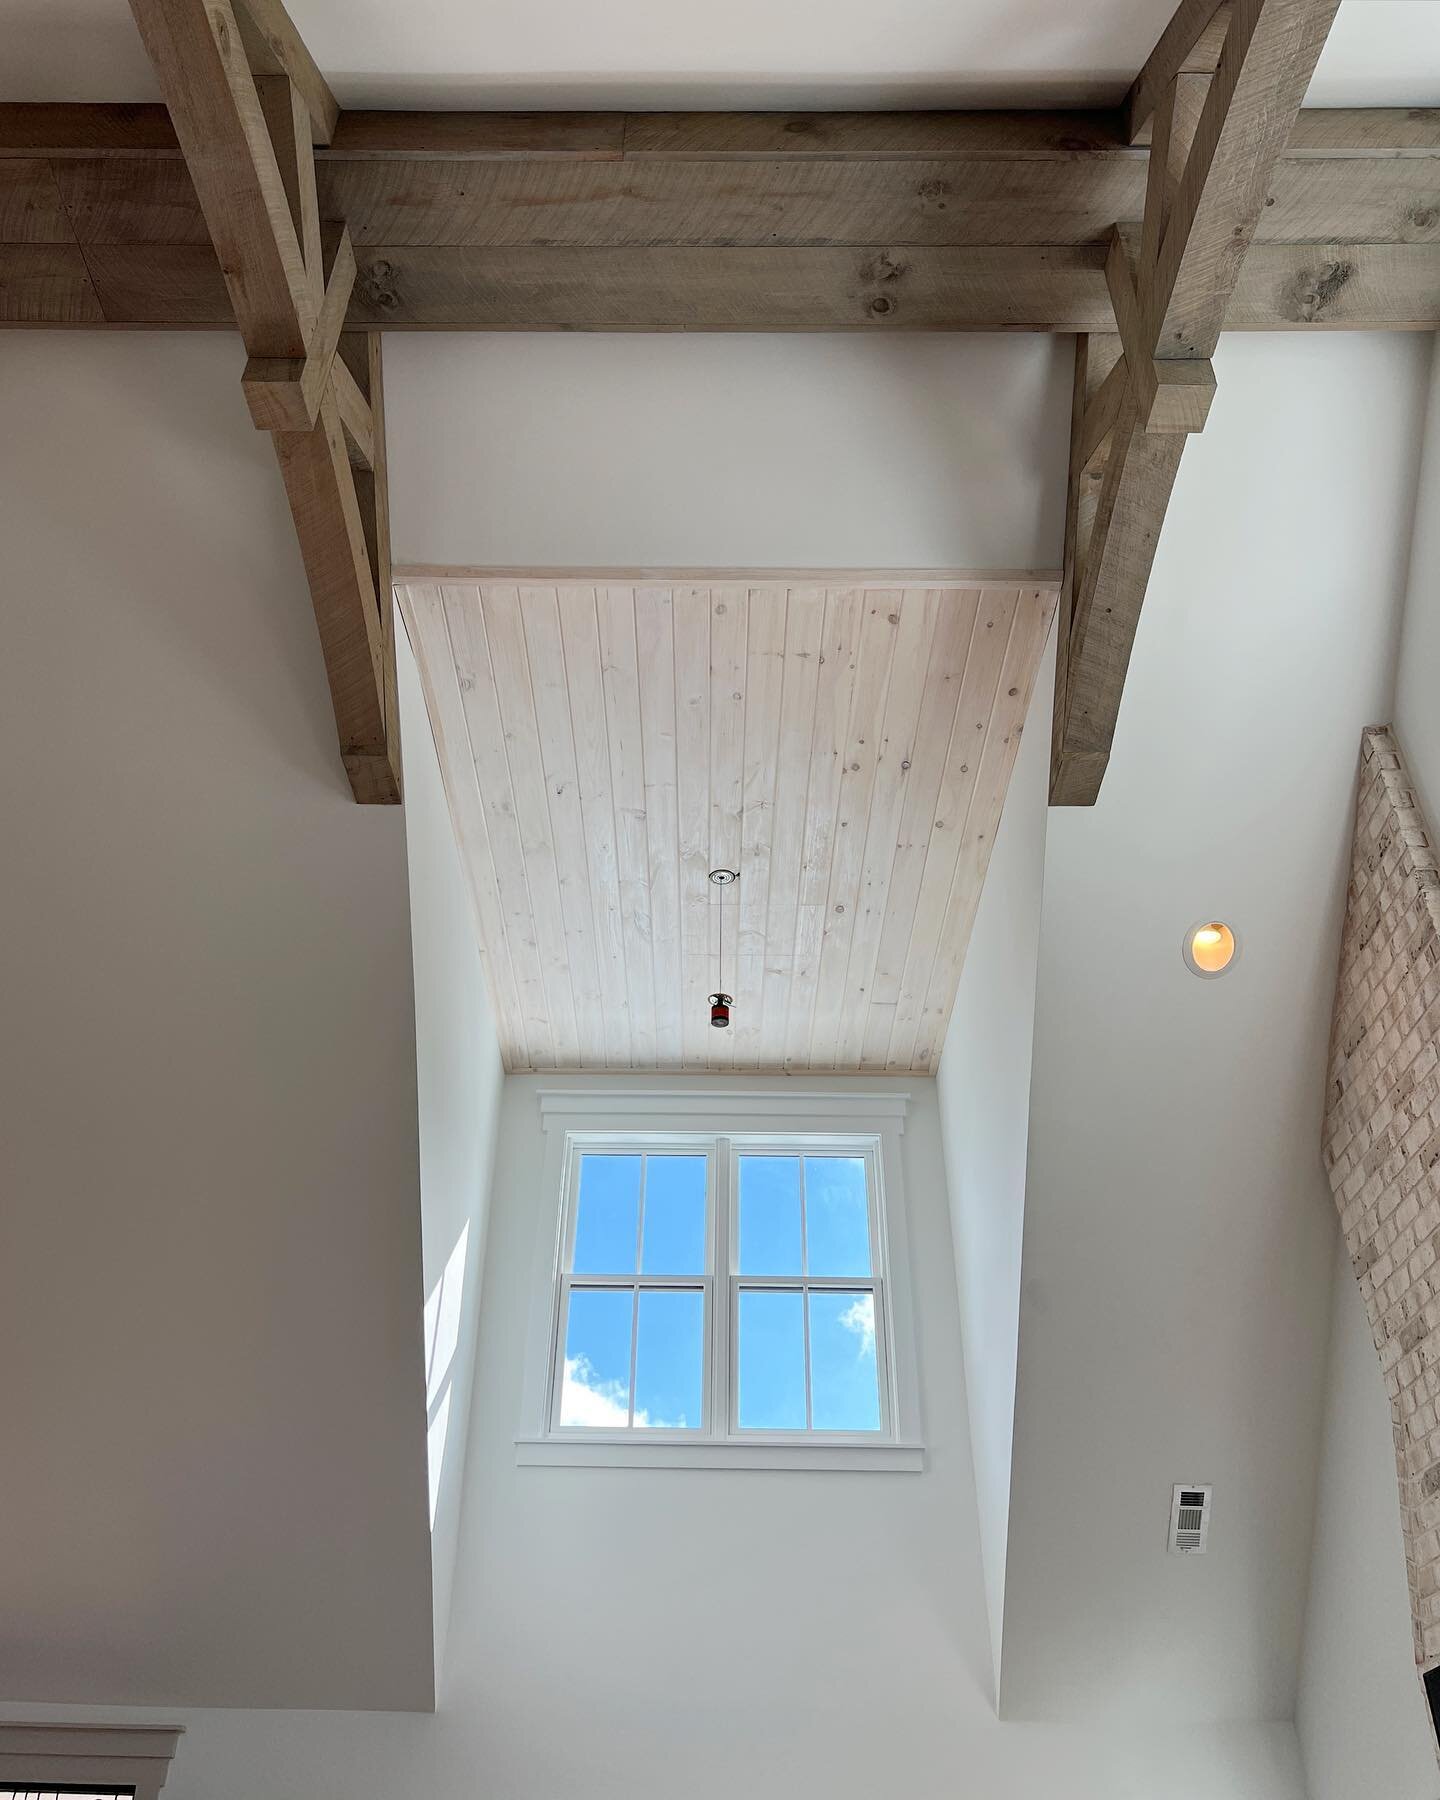 360* of detail in this Blue Ridge beauty 😍 We did a custom stain on the exposed beams, and a whitewash stain on the ceiling&rsquo;s tongue and groove. 
.
.
.
.
.
.
#blueridgecabins #atlpainter #interiorpainting #customstain #houseinspo #paintideas #